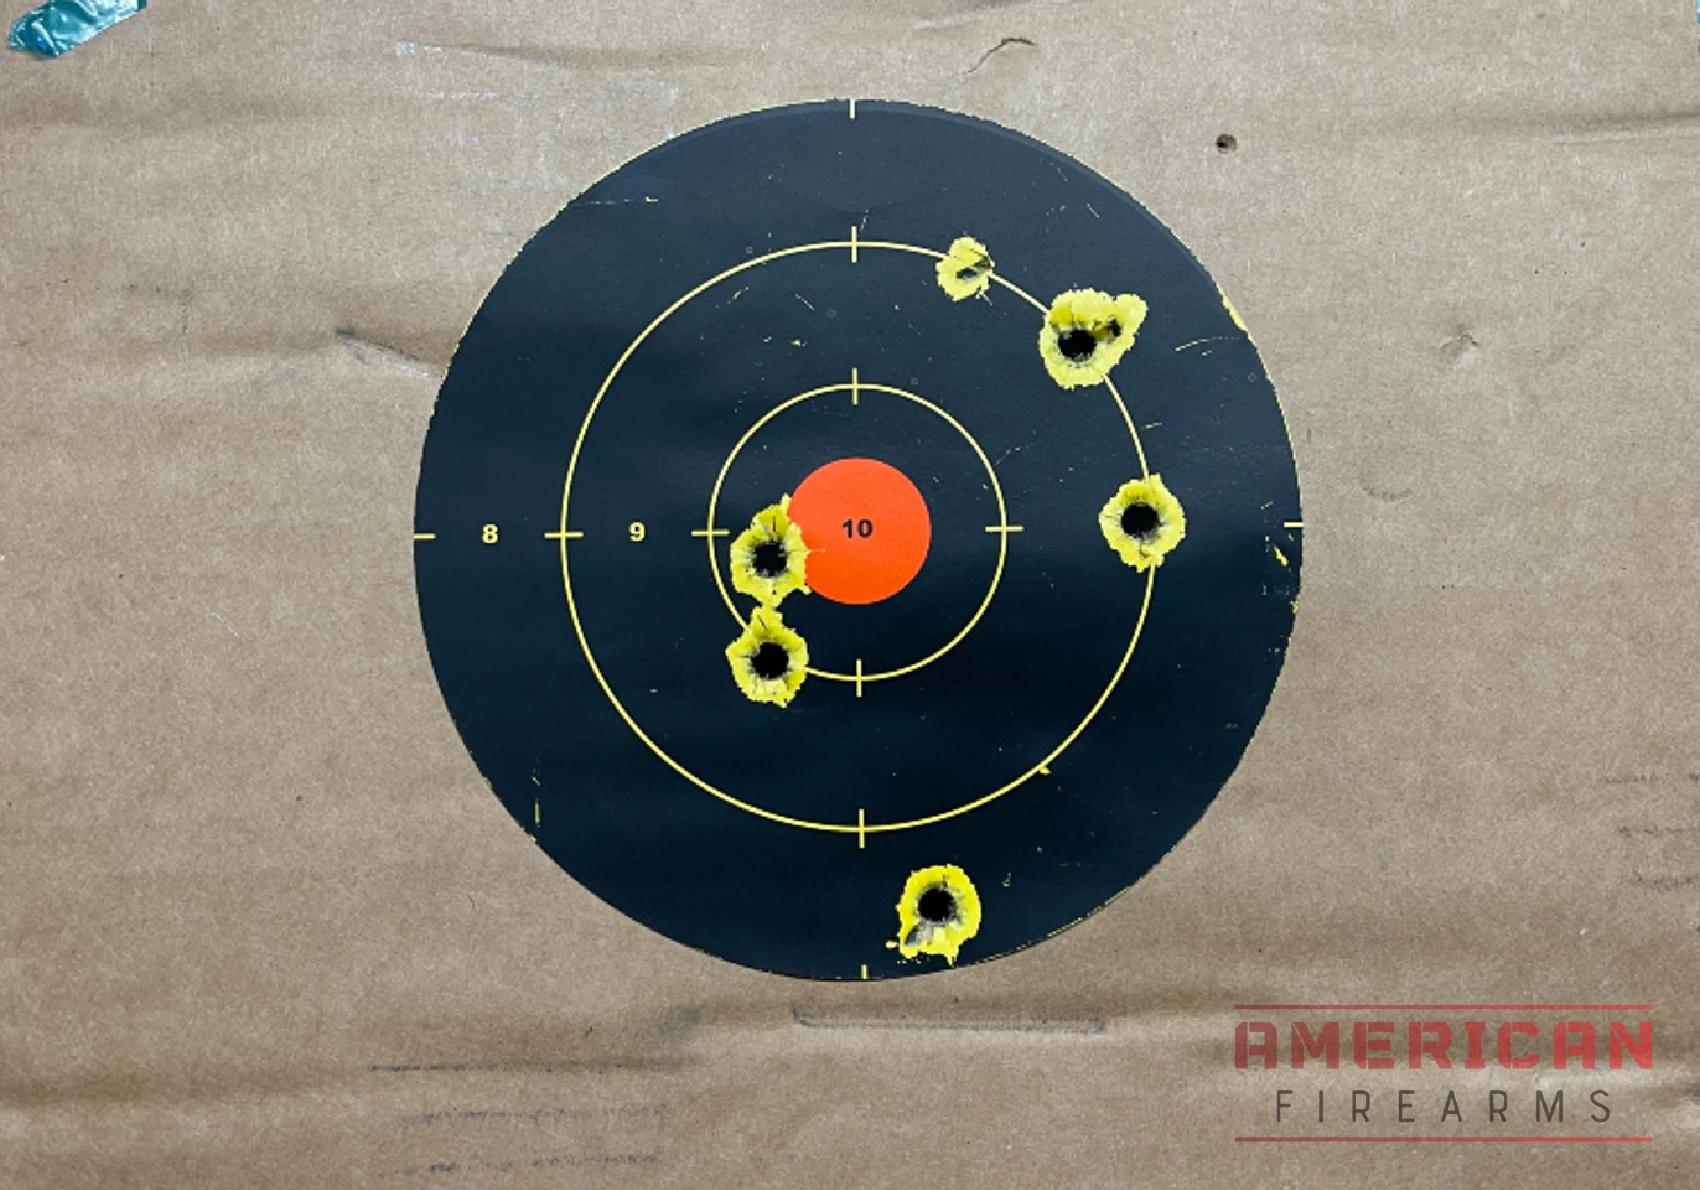 Groups were fair at 10 and 30 yards.